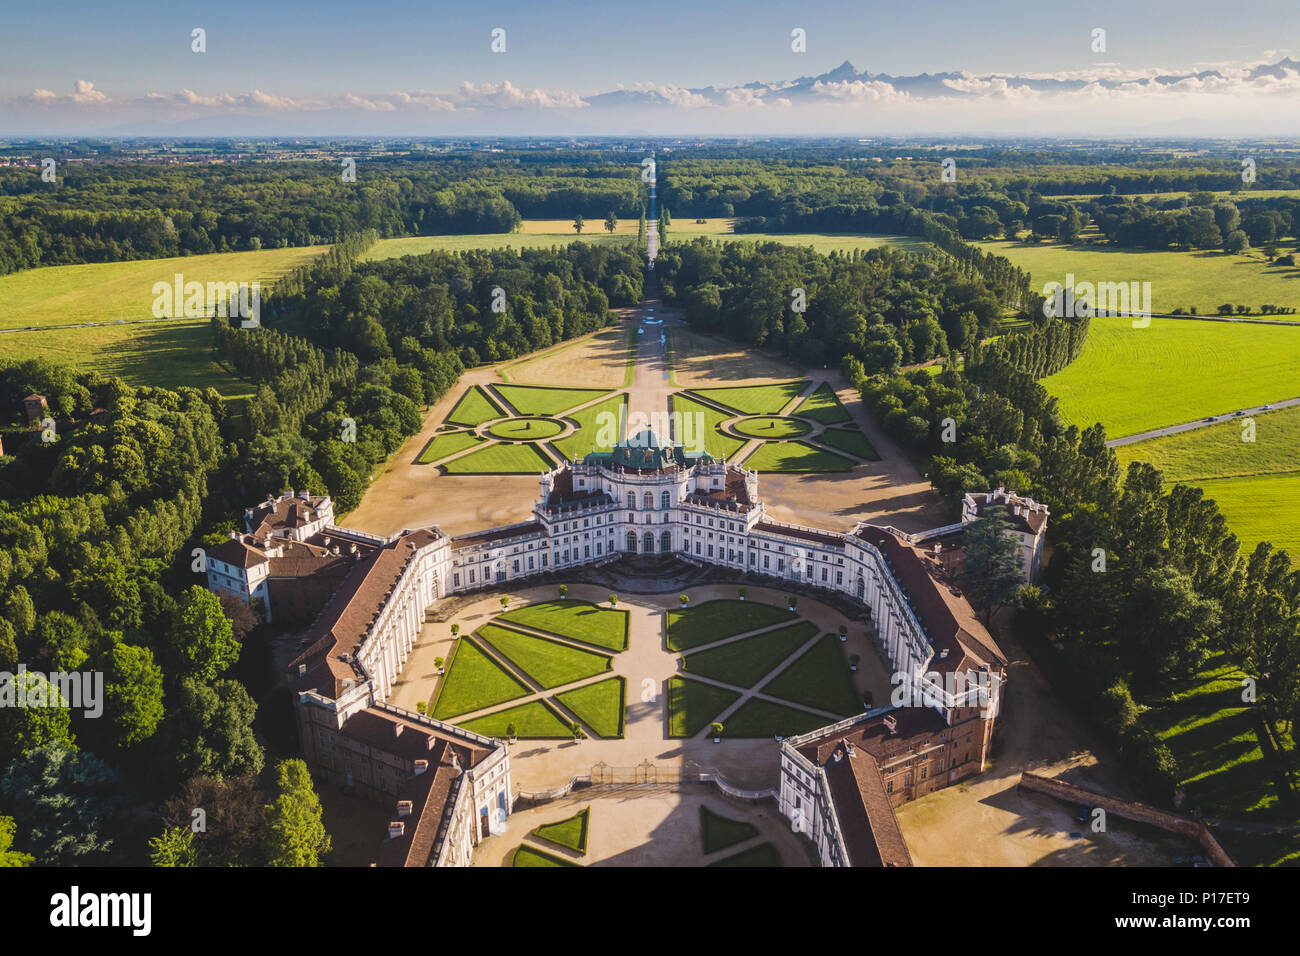 Aerial view of the Palazzina di caccia di Stupinigi, one of the residences  of the Royal House of Savoy in northern Italy, part of the UNESCO World  Heritage Sites list, located near